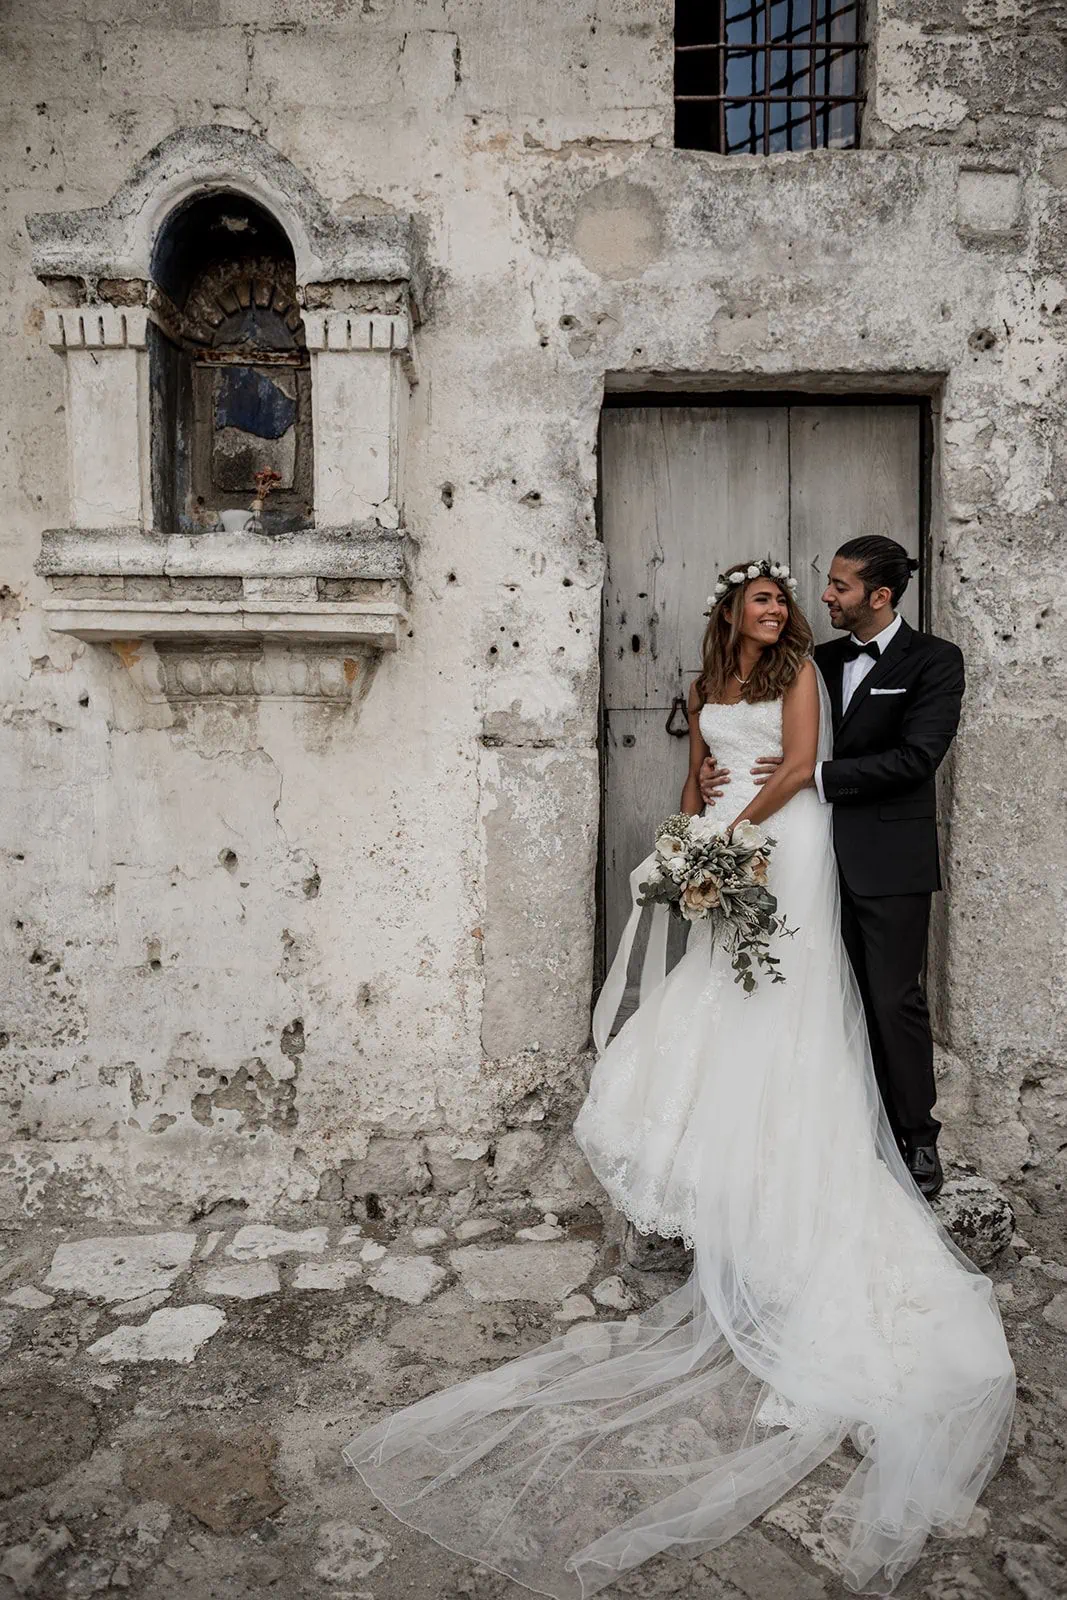 Bride and groom embrace in Matera Italy